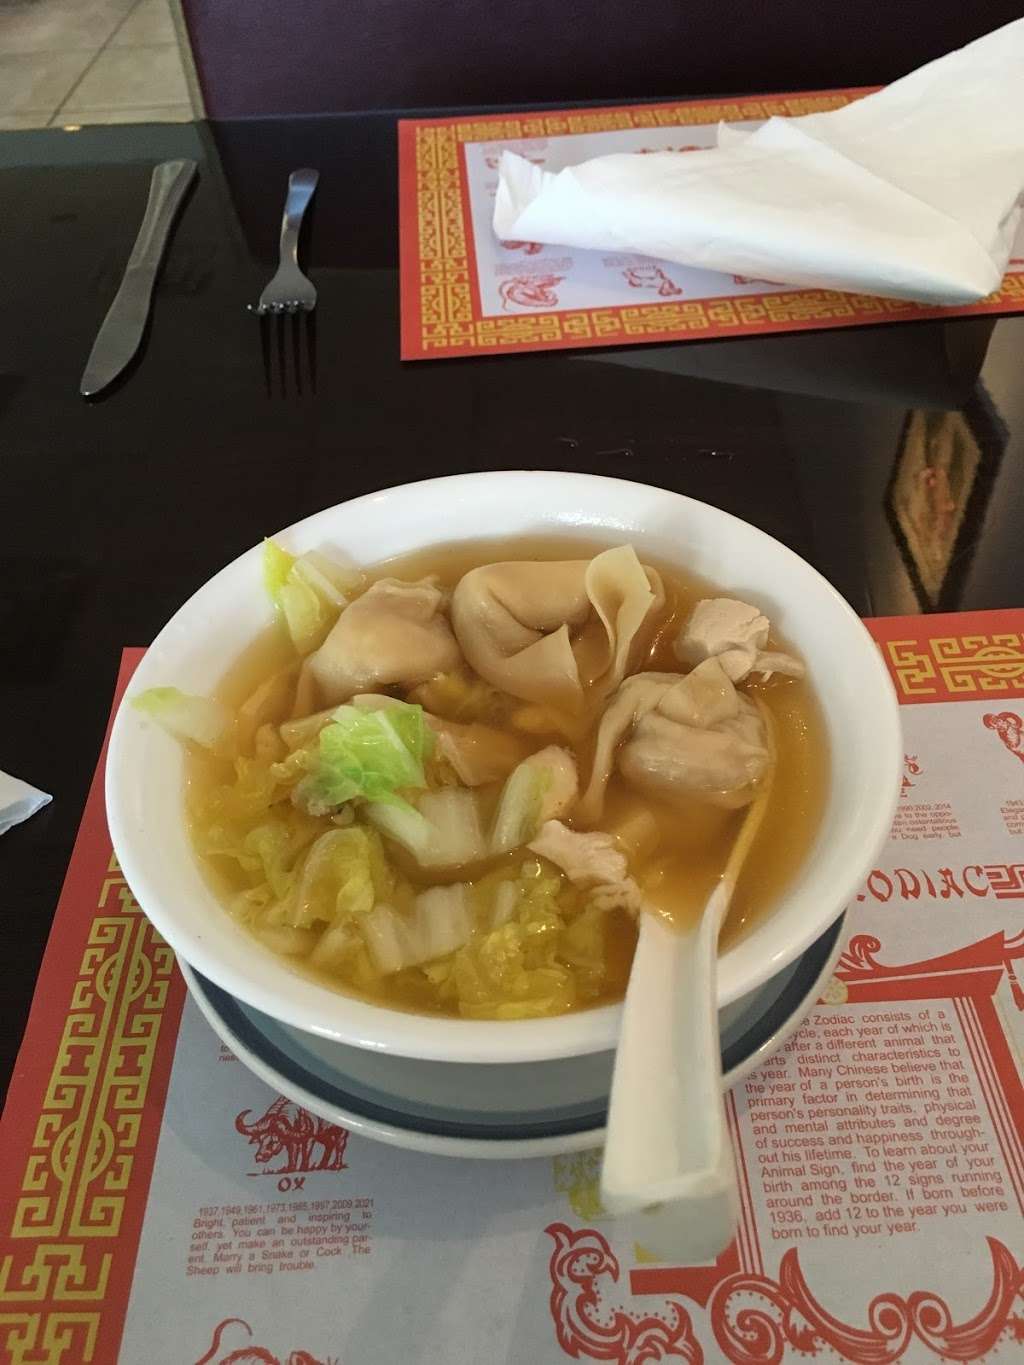 Mos Chinese Kitchen Inc | 2417 E Joliet Hwy, New Lenox, IL 60451 | Phone: (815) 462-3388